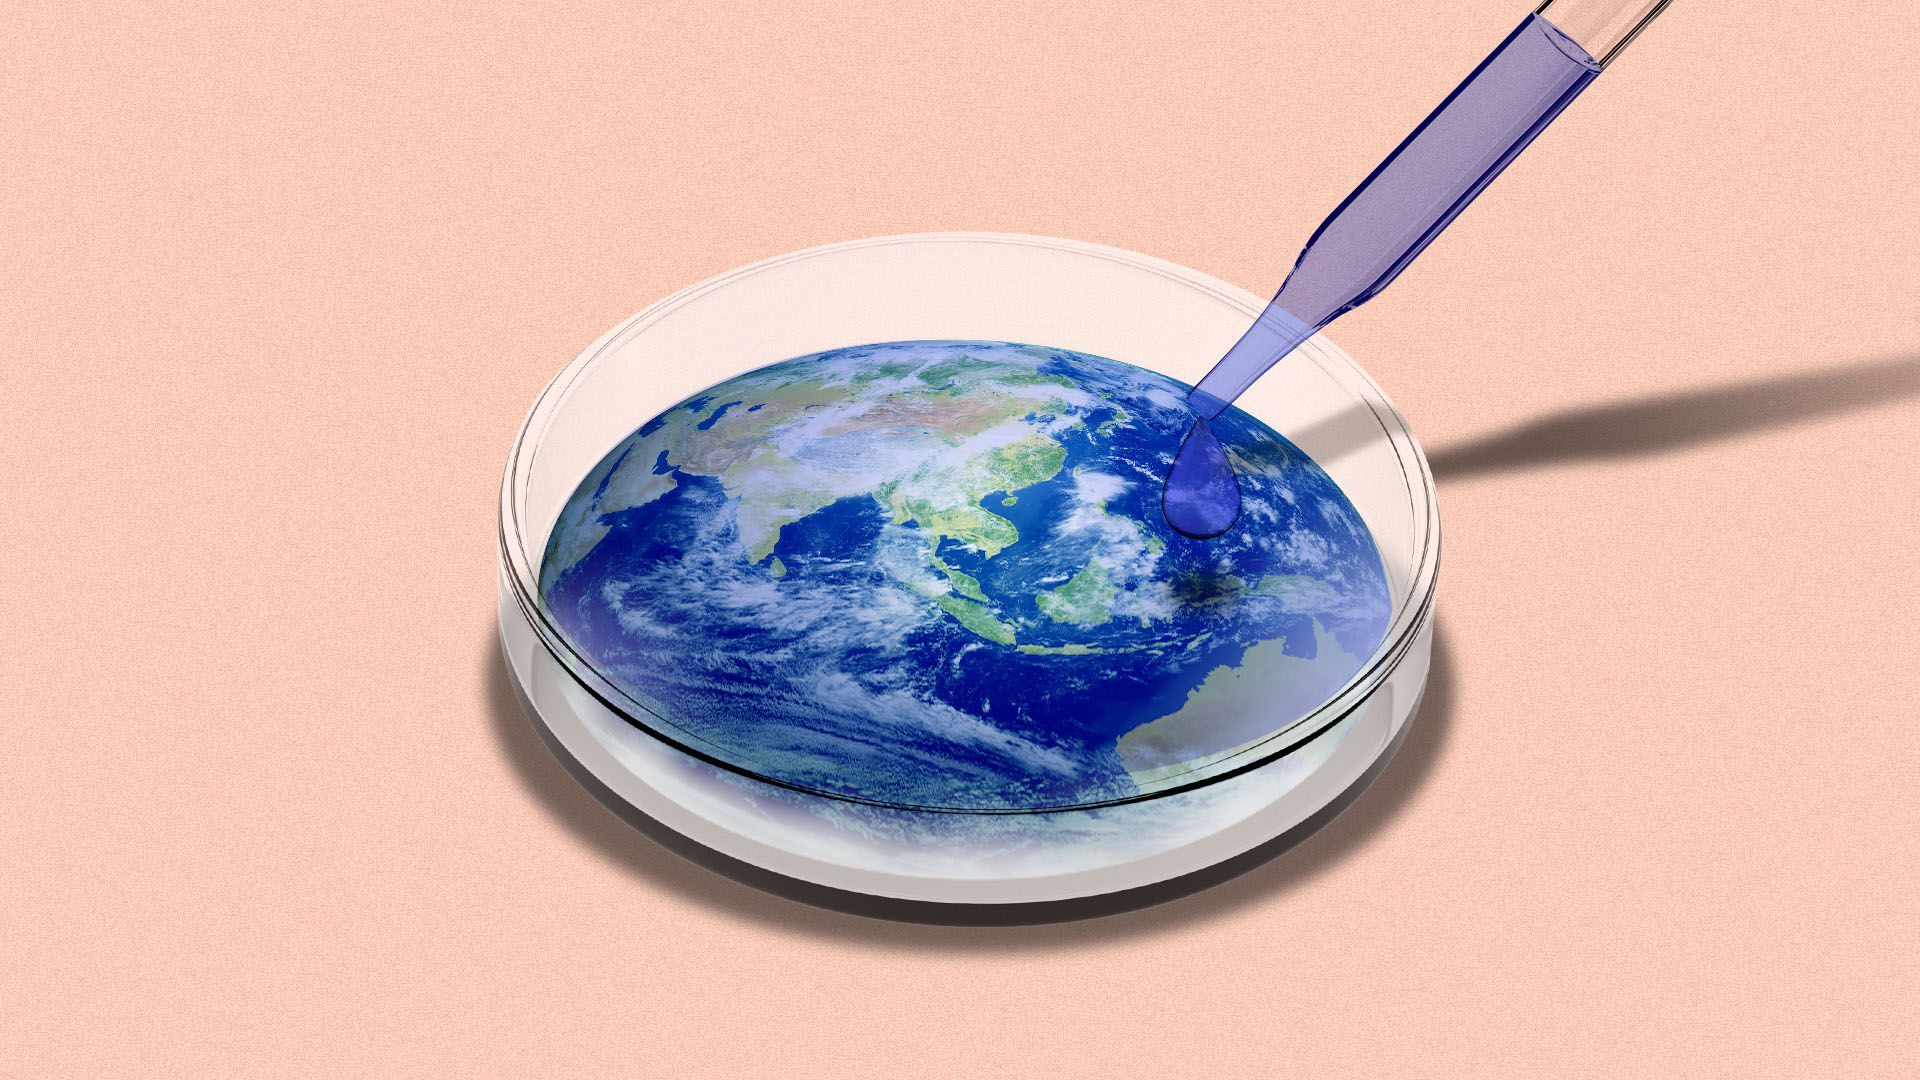 Illustration of the globe in a petri dish with a pipette dripping into it